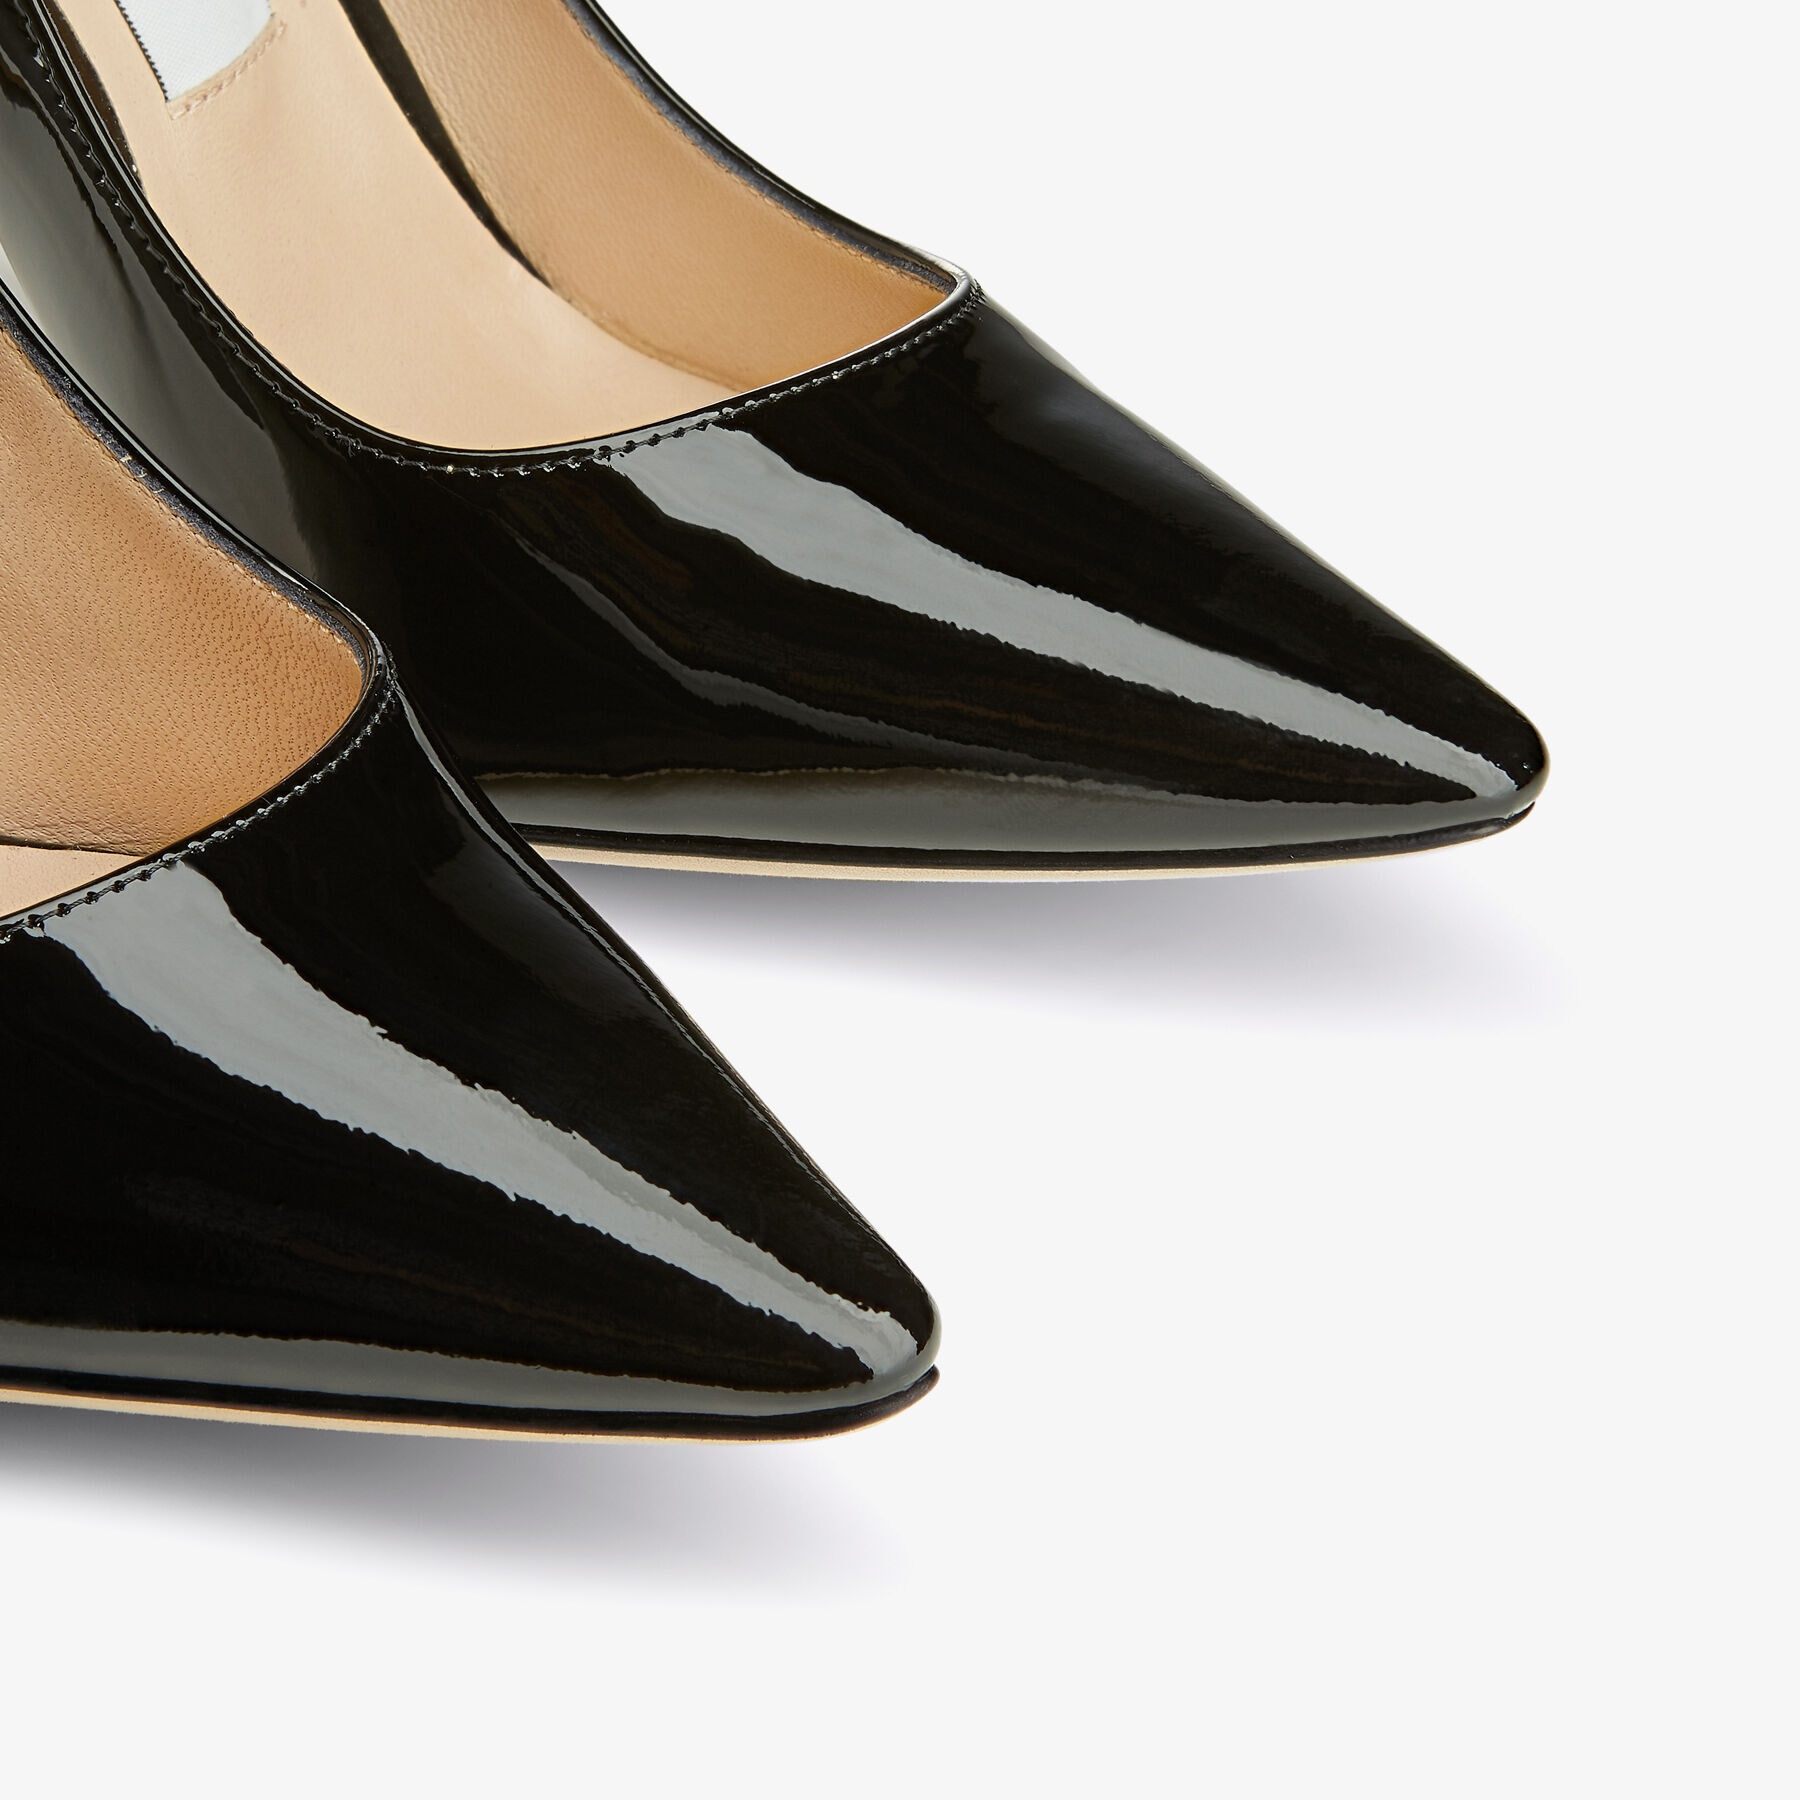 Romy 100
Black Patent Leather Pointy Toe Pumps - 4